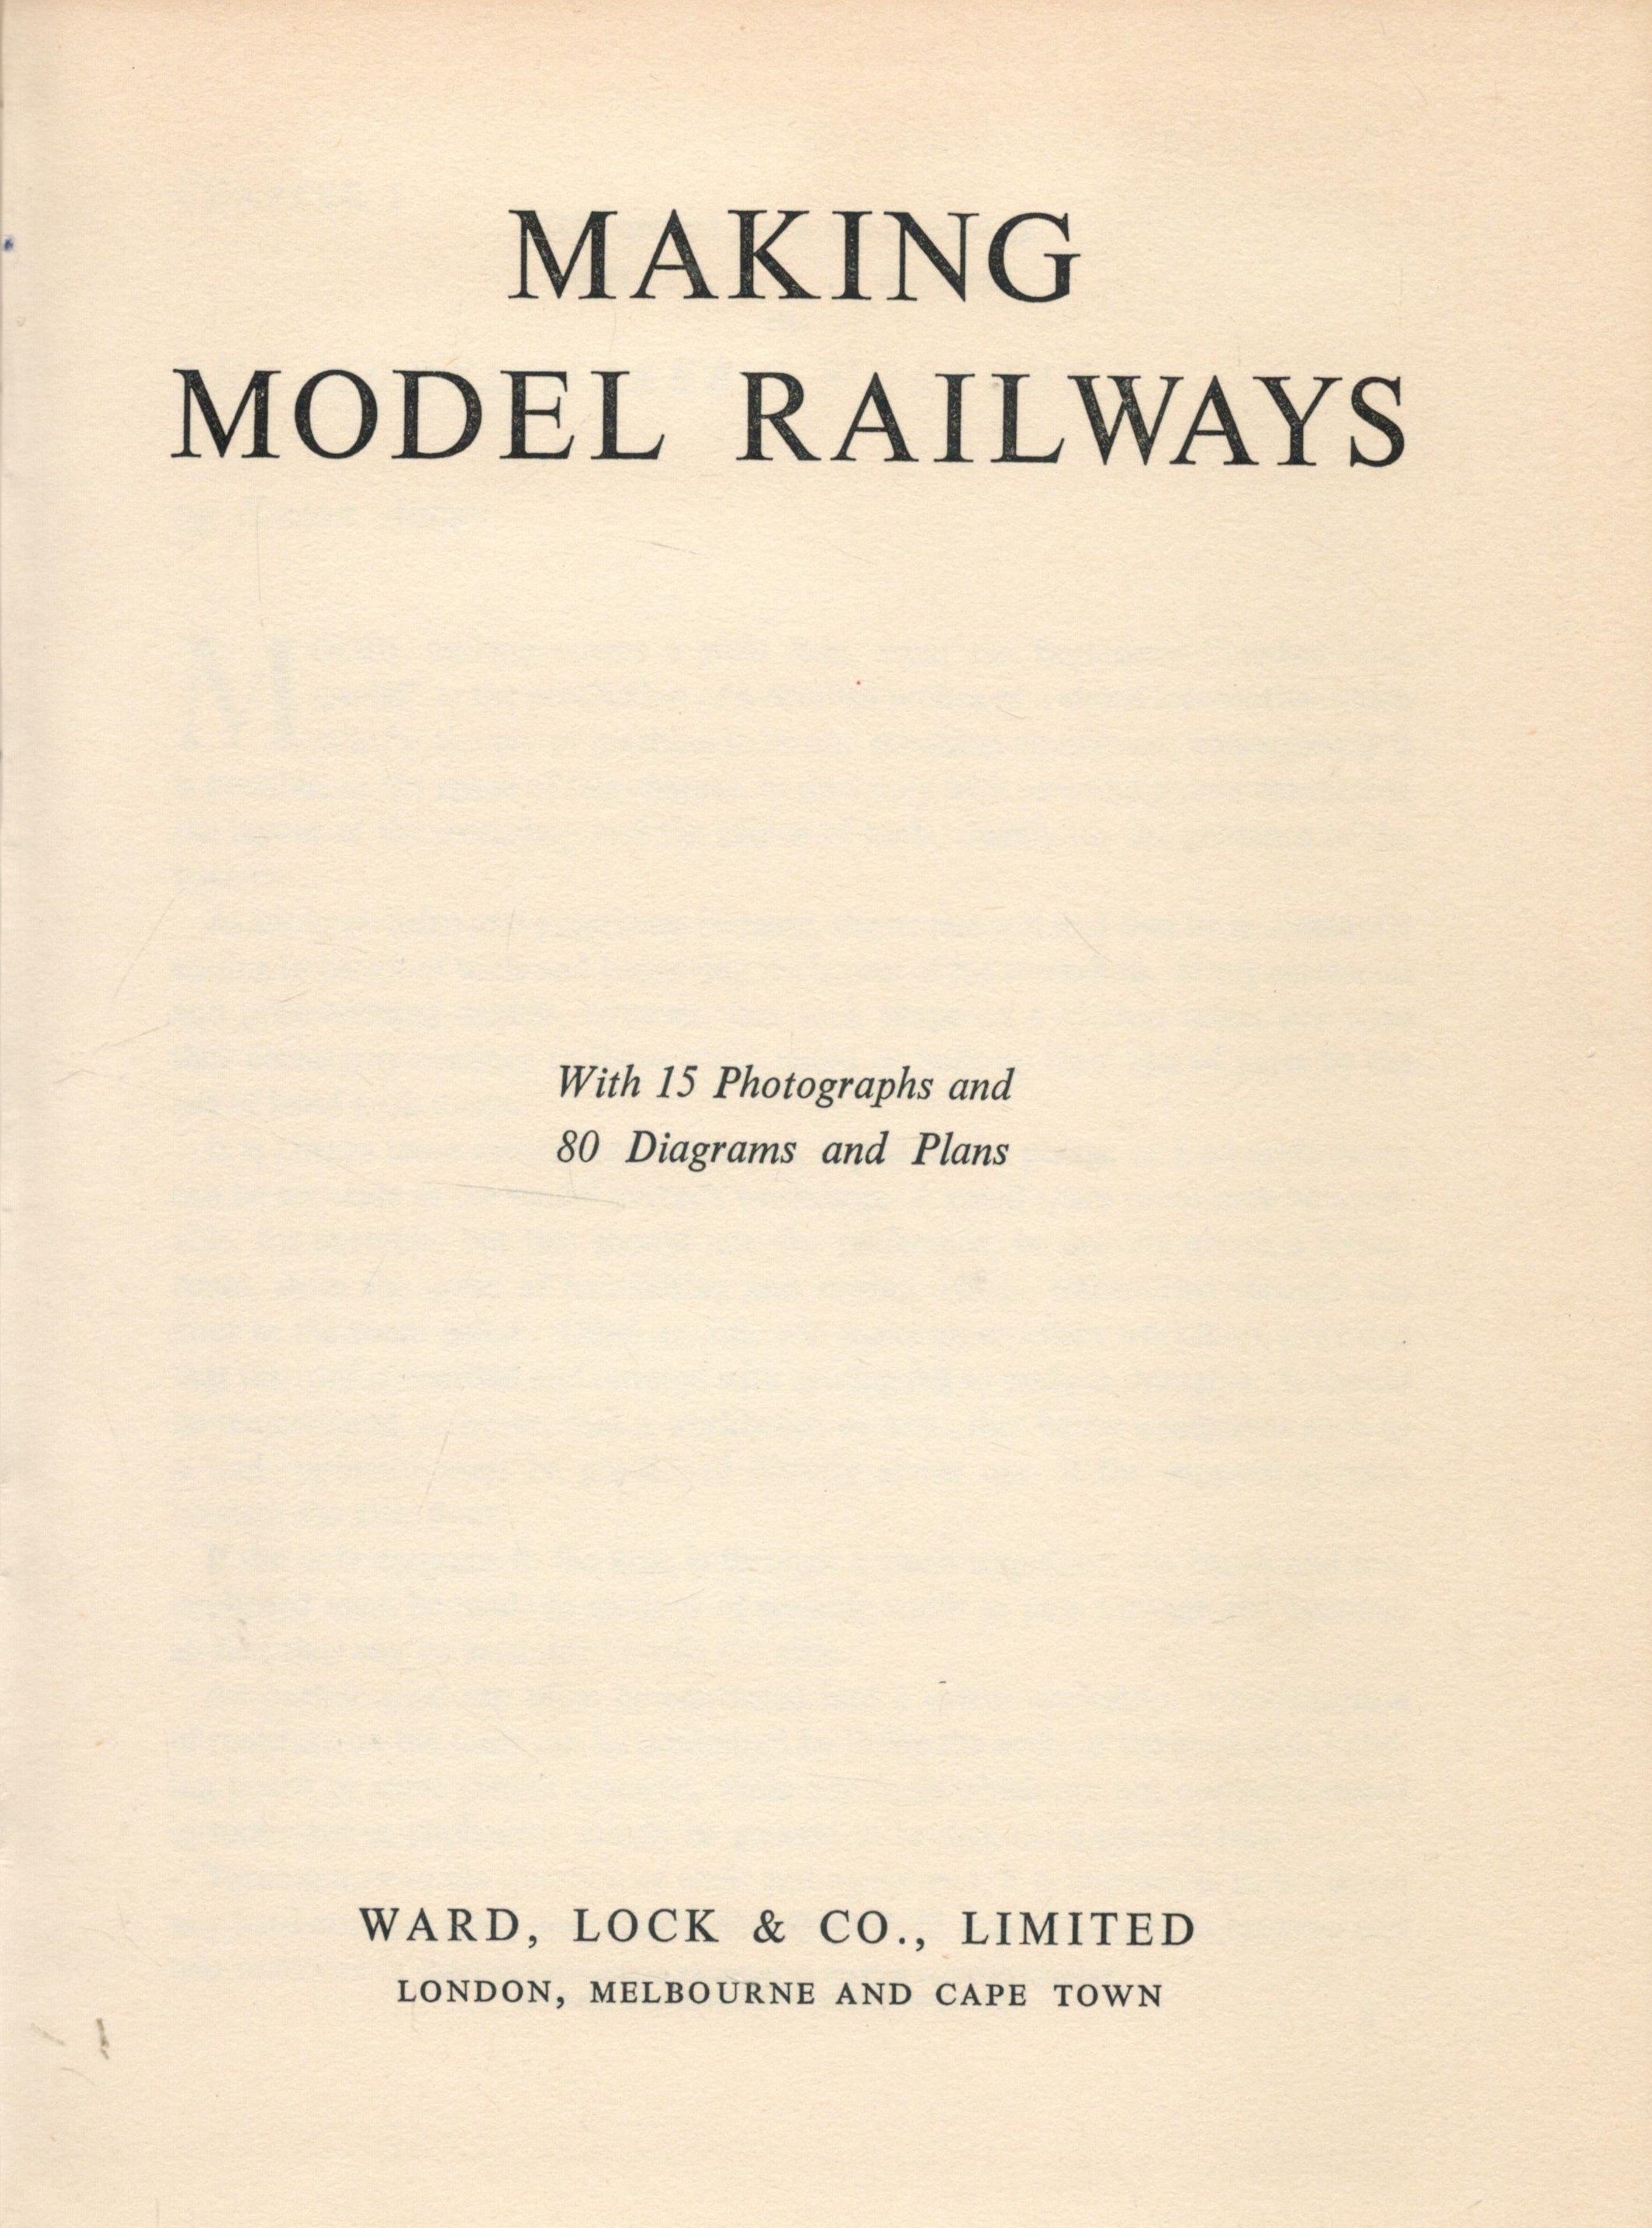 Making Model Railways 1959 Second Edition Hardback Book with 79 pages published by Ward, Lock and Co - Image 2 of 3